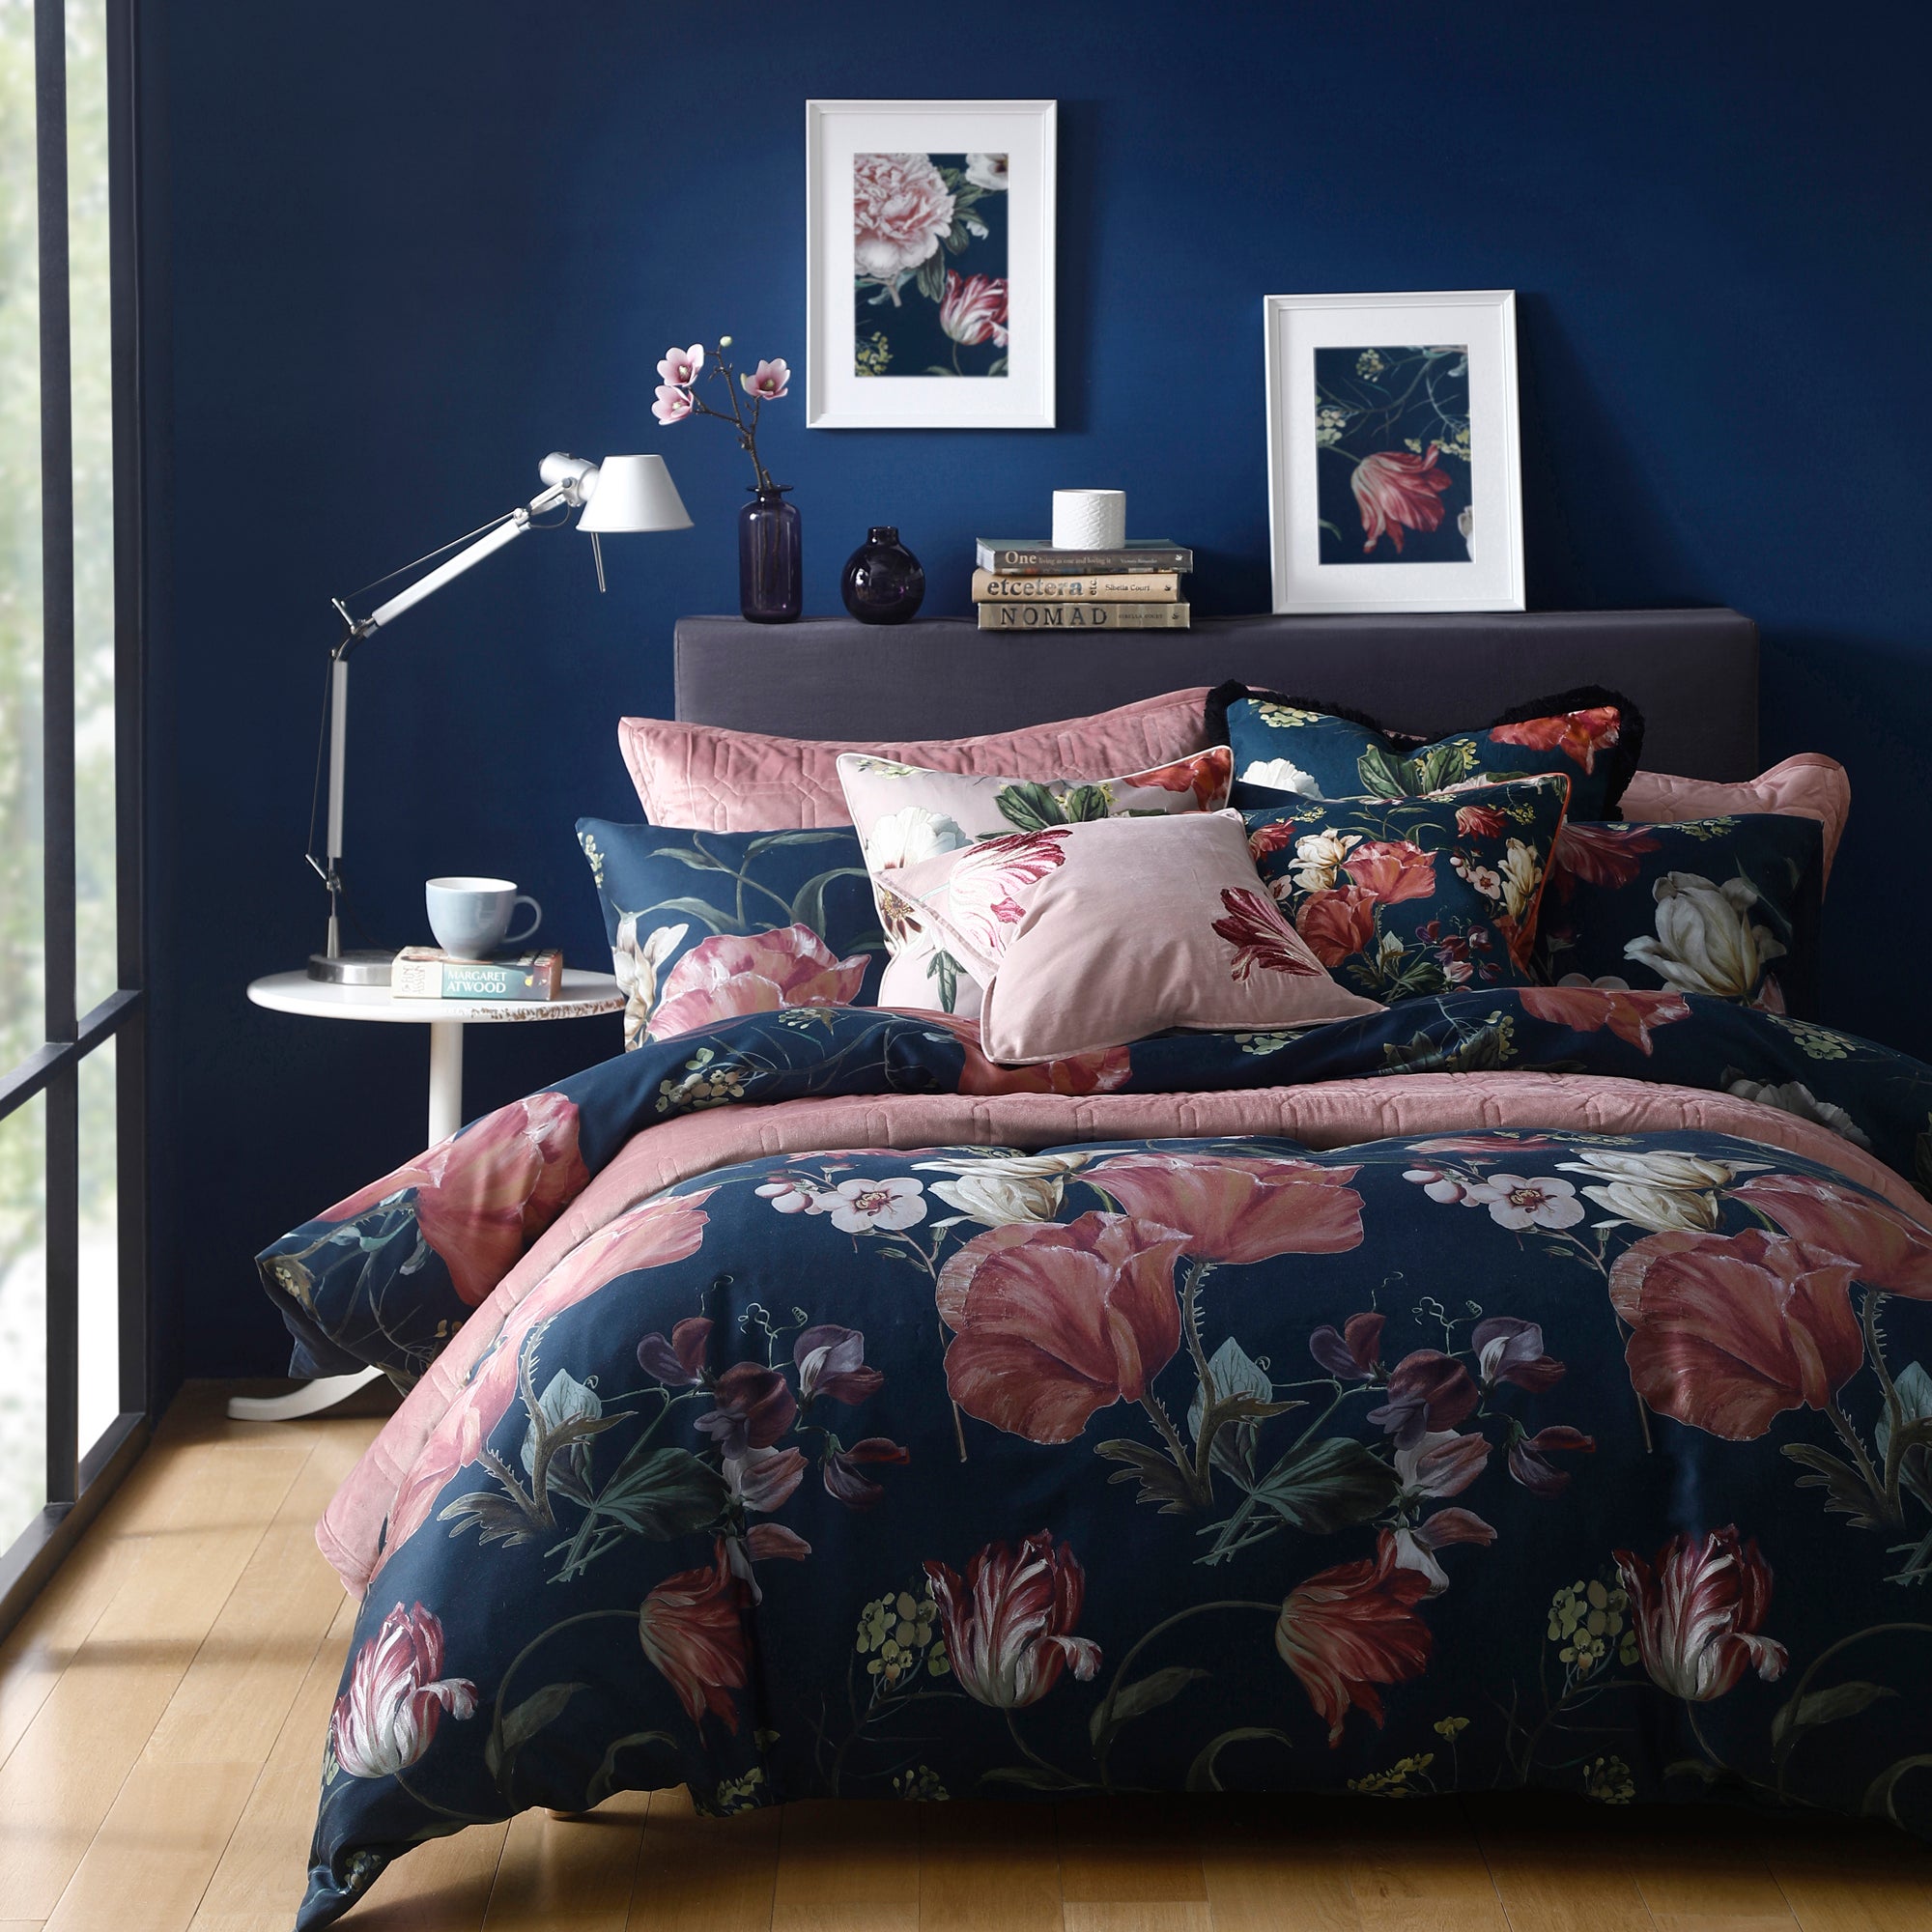 Larabella Floral Navy and Pink 100% Cotton Sateen Duvet Cover and Pillowcase Set Navy Blue/Pink/Green